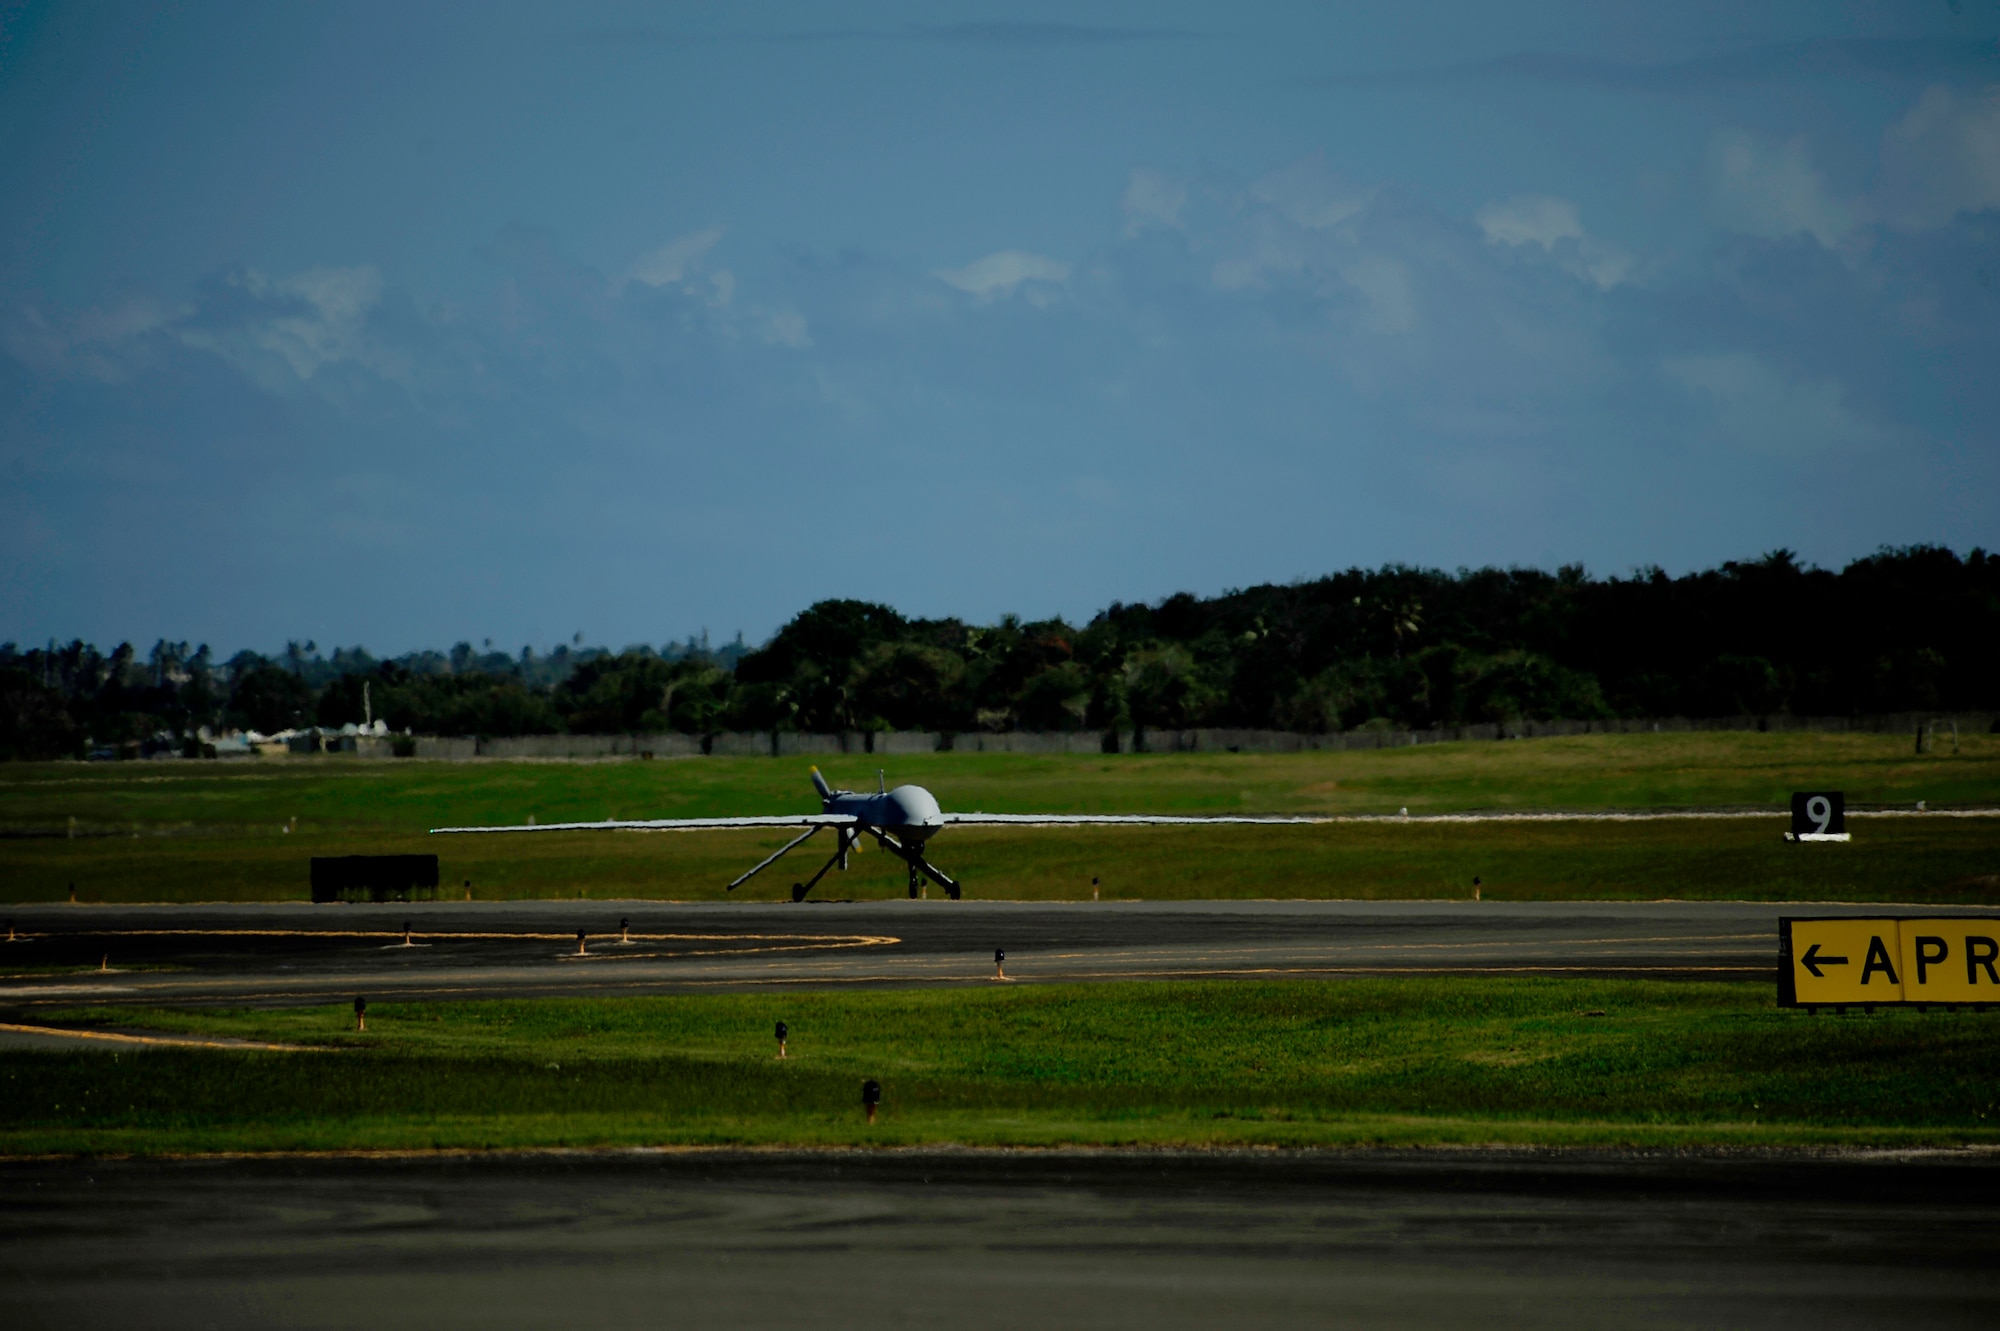 A U.S. Air Force RQ-1 Predator from the 432nd Wing, Creech Air Force Base, Nevada lands at Aeropuerto Rafael Hernandez outside Aguadilla, Puerto Rico on 28 Jan., 2010.  The RQ-1 remotely piloted systems are operating out of Puerto Rico in support of Operation Unified Response in Haiti.  Airmen from Creech Air Force Base, Las Vegas, Nev. are providing 24 hour a day full-motion video in real time to international relief workers on the ground in order to speed humanitarian aid to remote and cut-off areas of the country following the earthquake on 12 Jan., 2010. (U.S. Air Force photo by Tech. Sgt. James L. Harper Jr.)